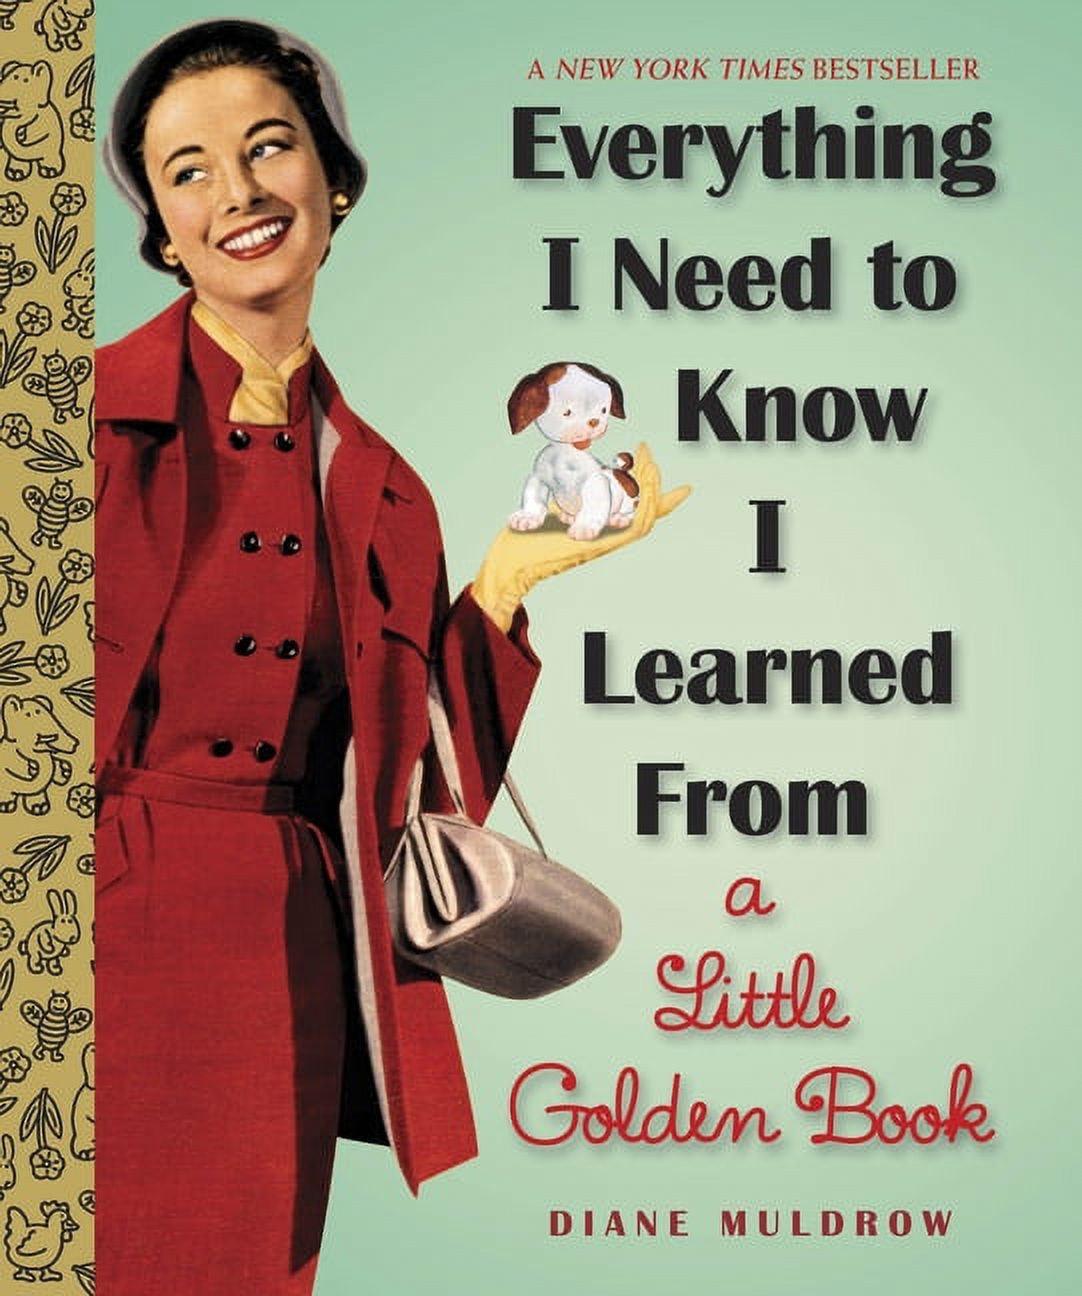 Everything I Need To Know I Learned From a Little Golden Book : A Graduation Gift Book (Hardcover) - image 1 of 1